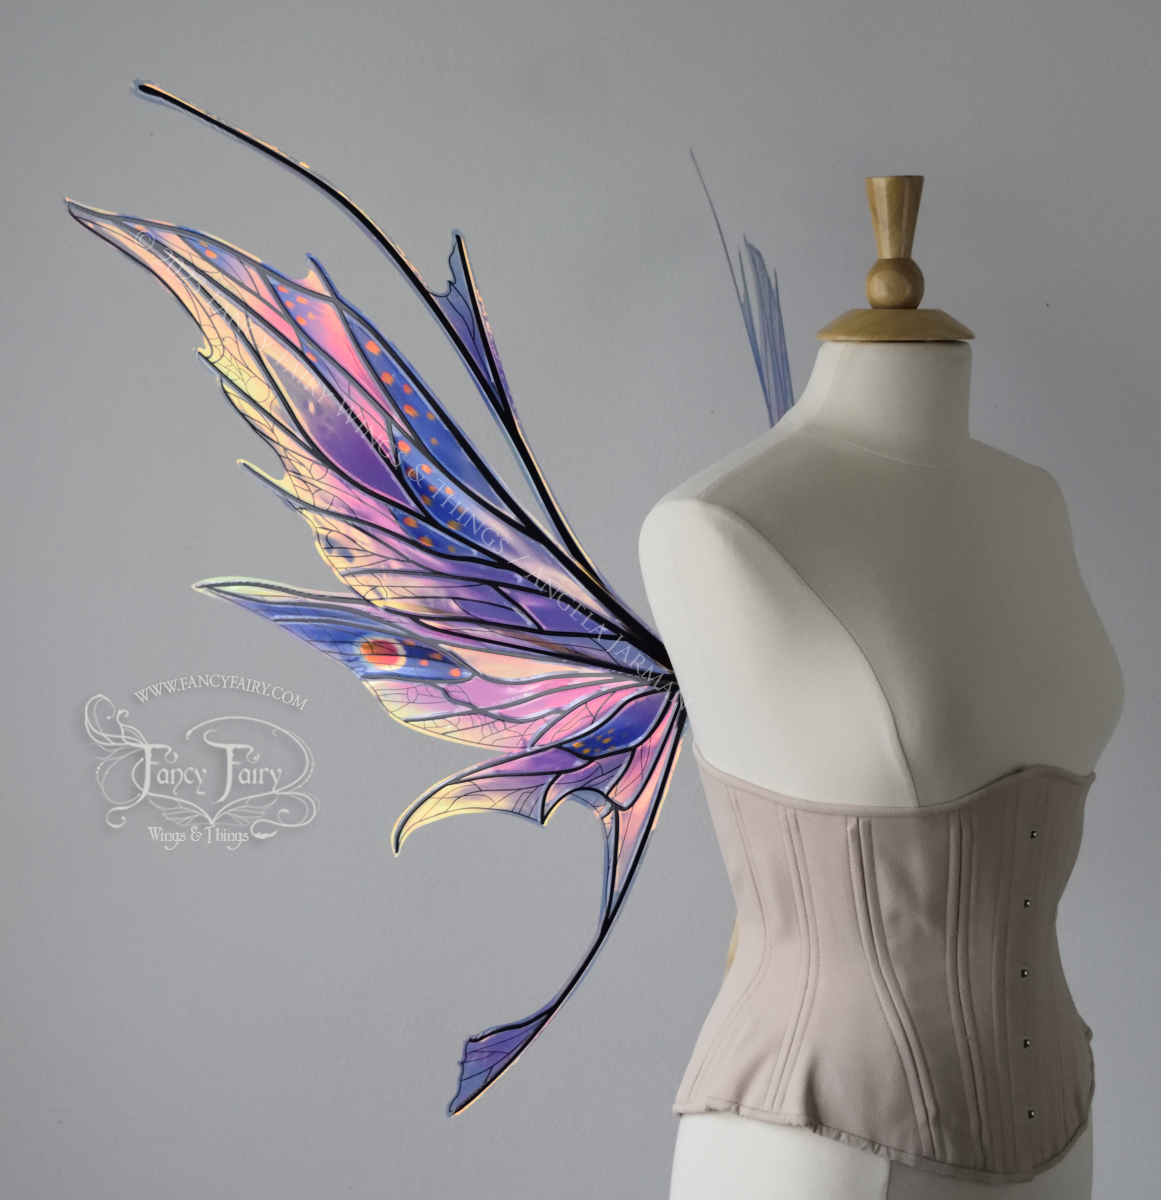 Left side view of a dress form wearing an underbust corset & large blue / lavender / red painted iridescent fairy wings with antennae, black veins, spikey shapes